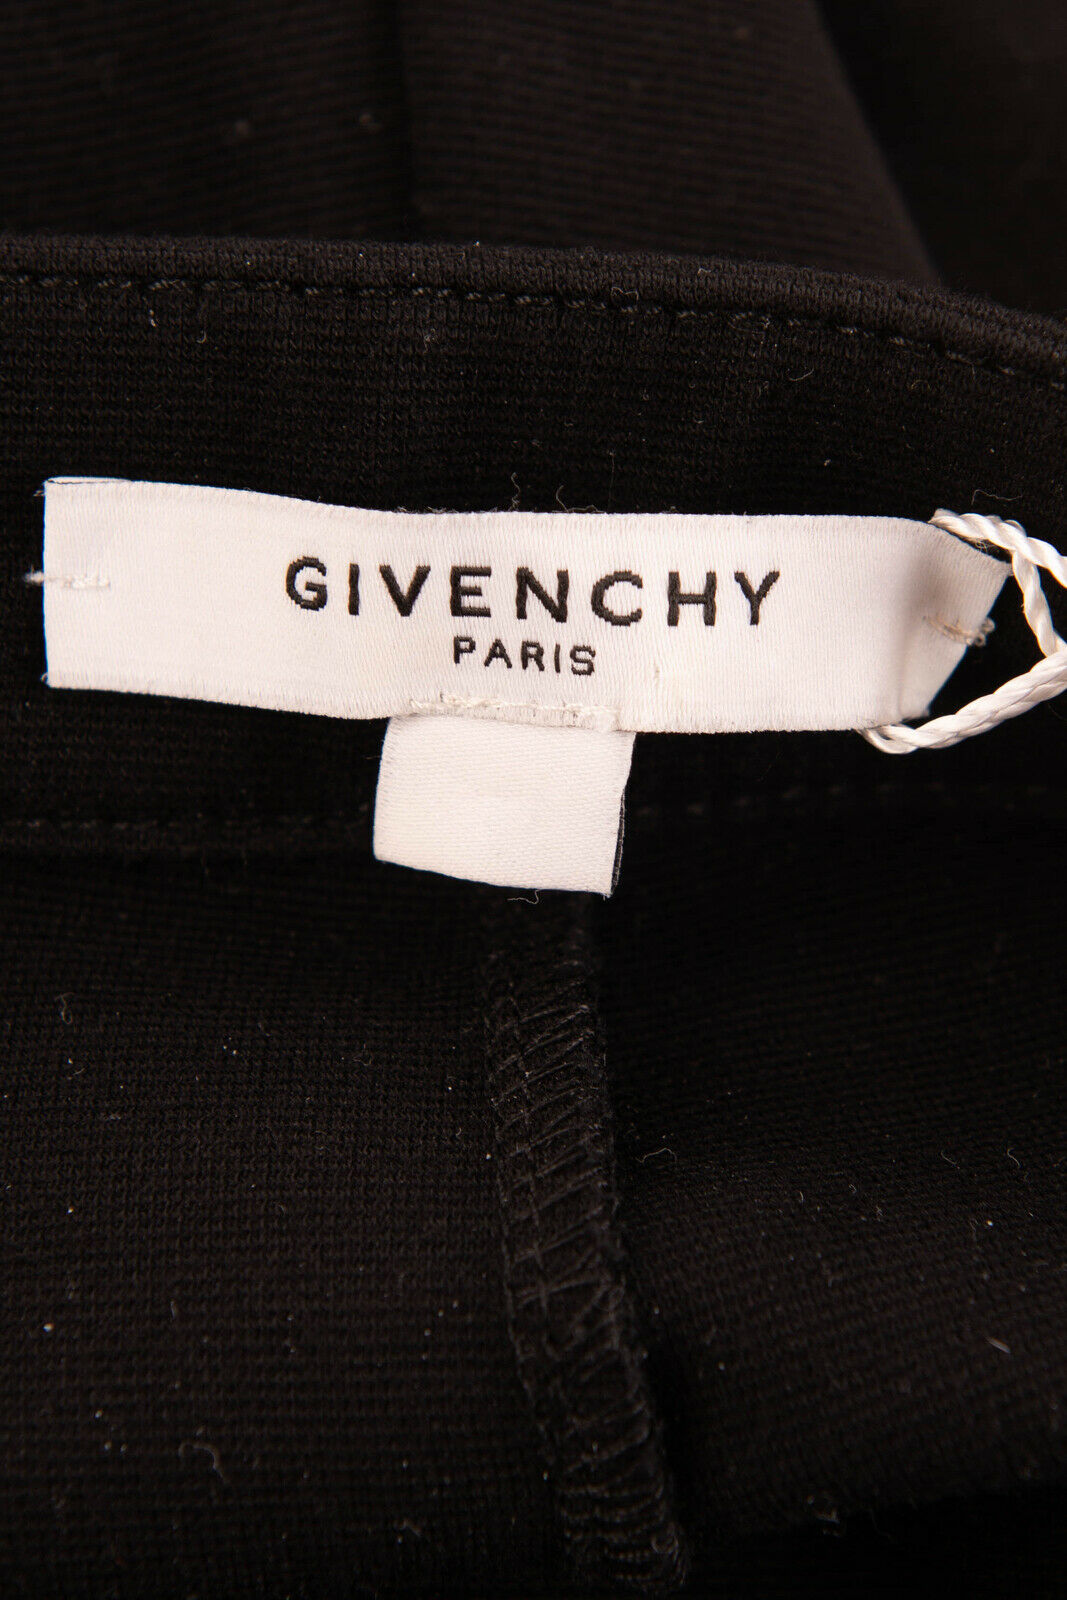 GIVENCHY Trousers Size 38 S Stretch Zipped Cuffs Made in Italy